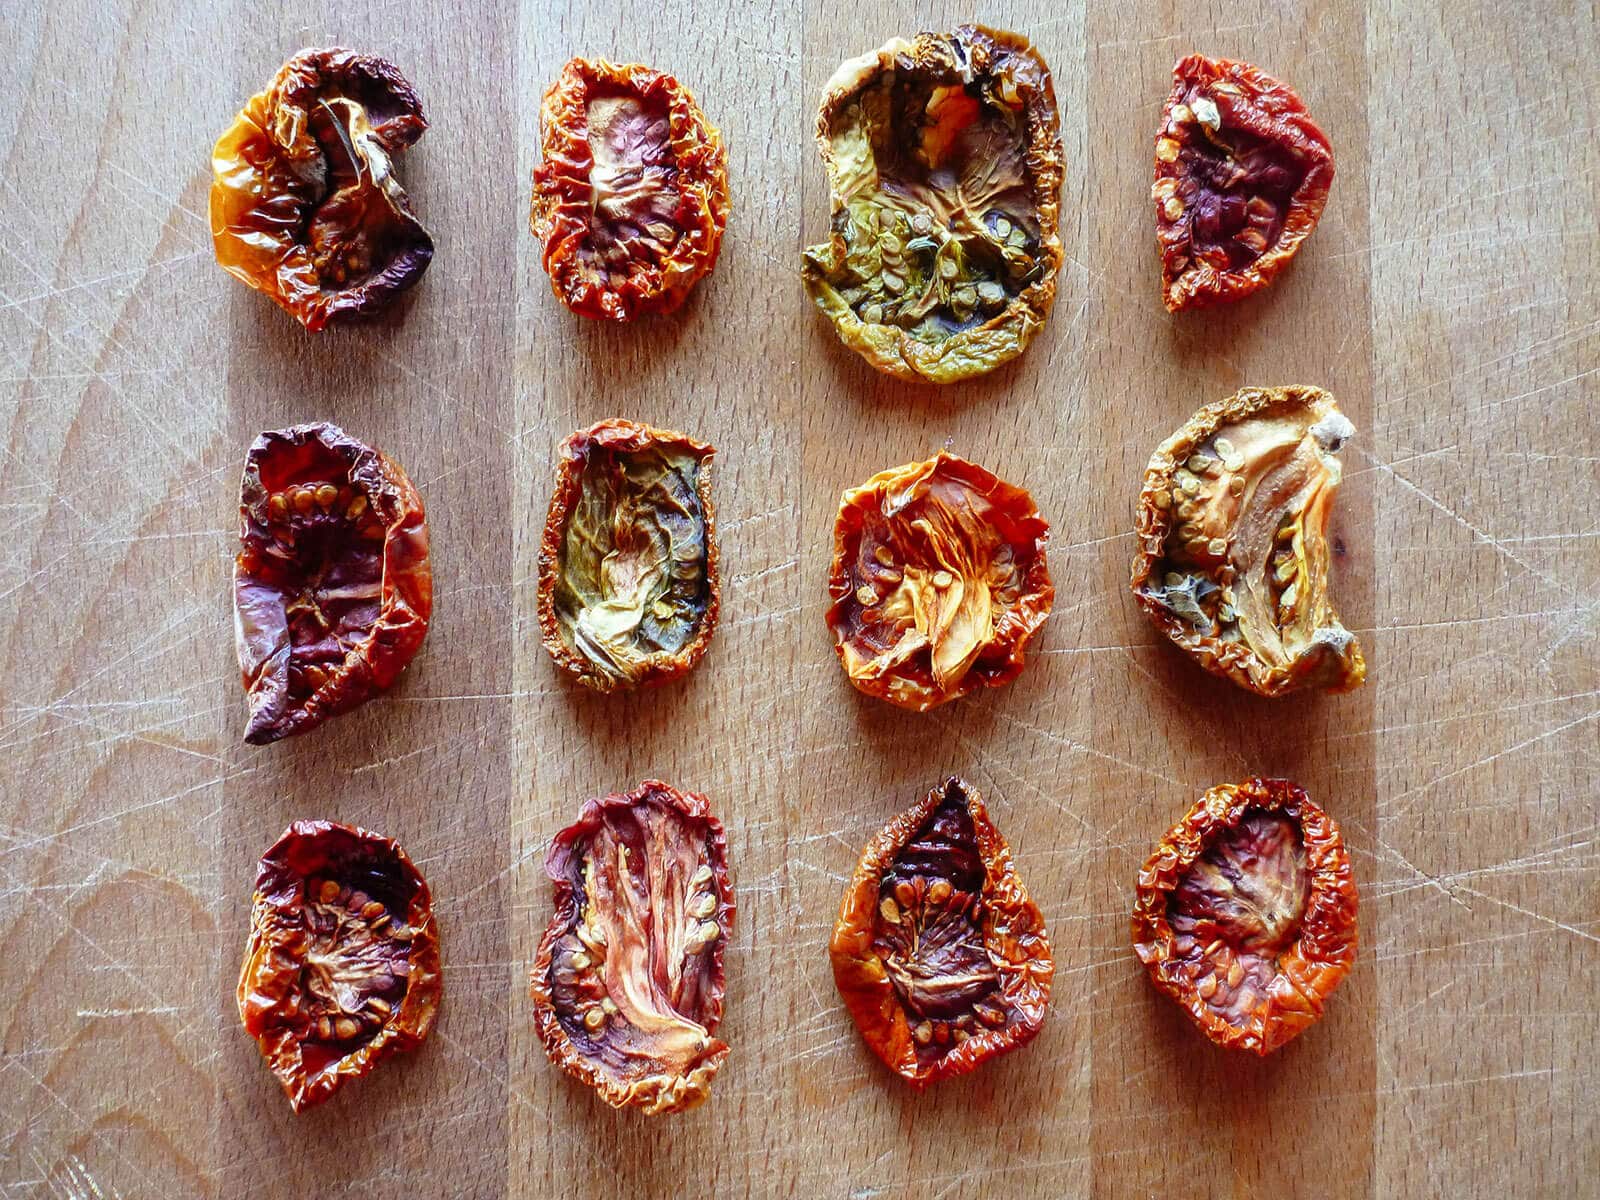 How to Make Sun Dried Tomatoes - PlantYou